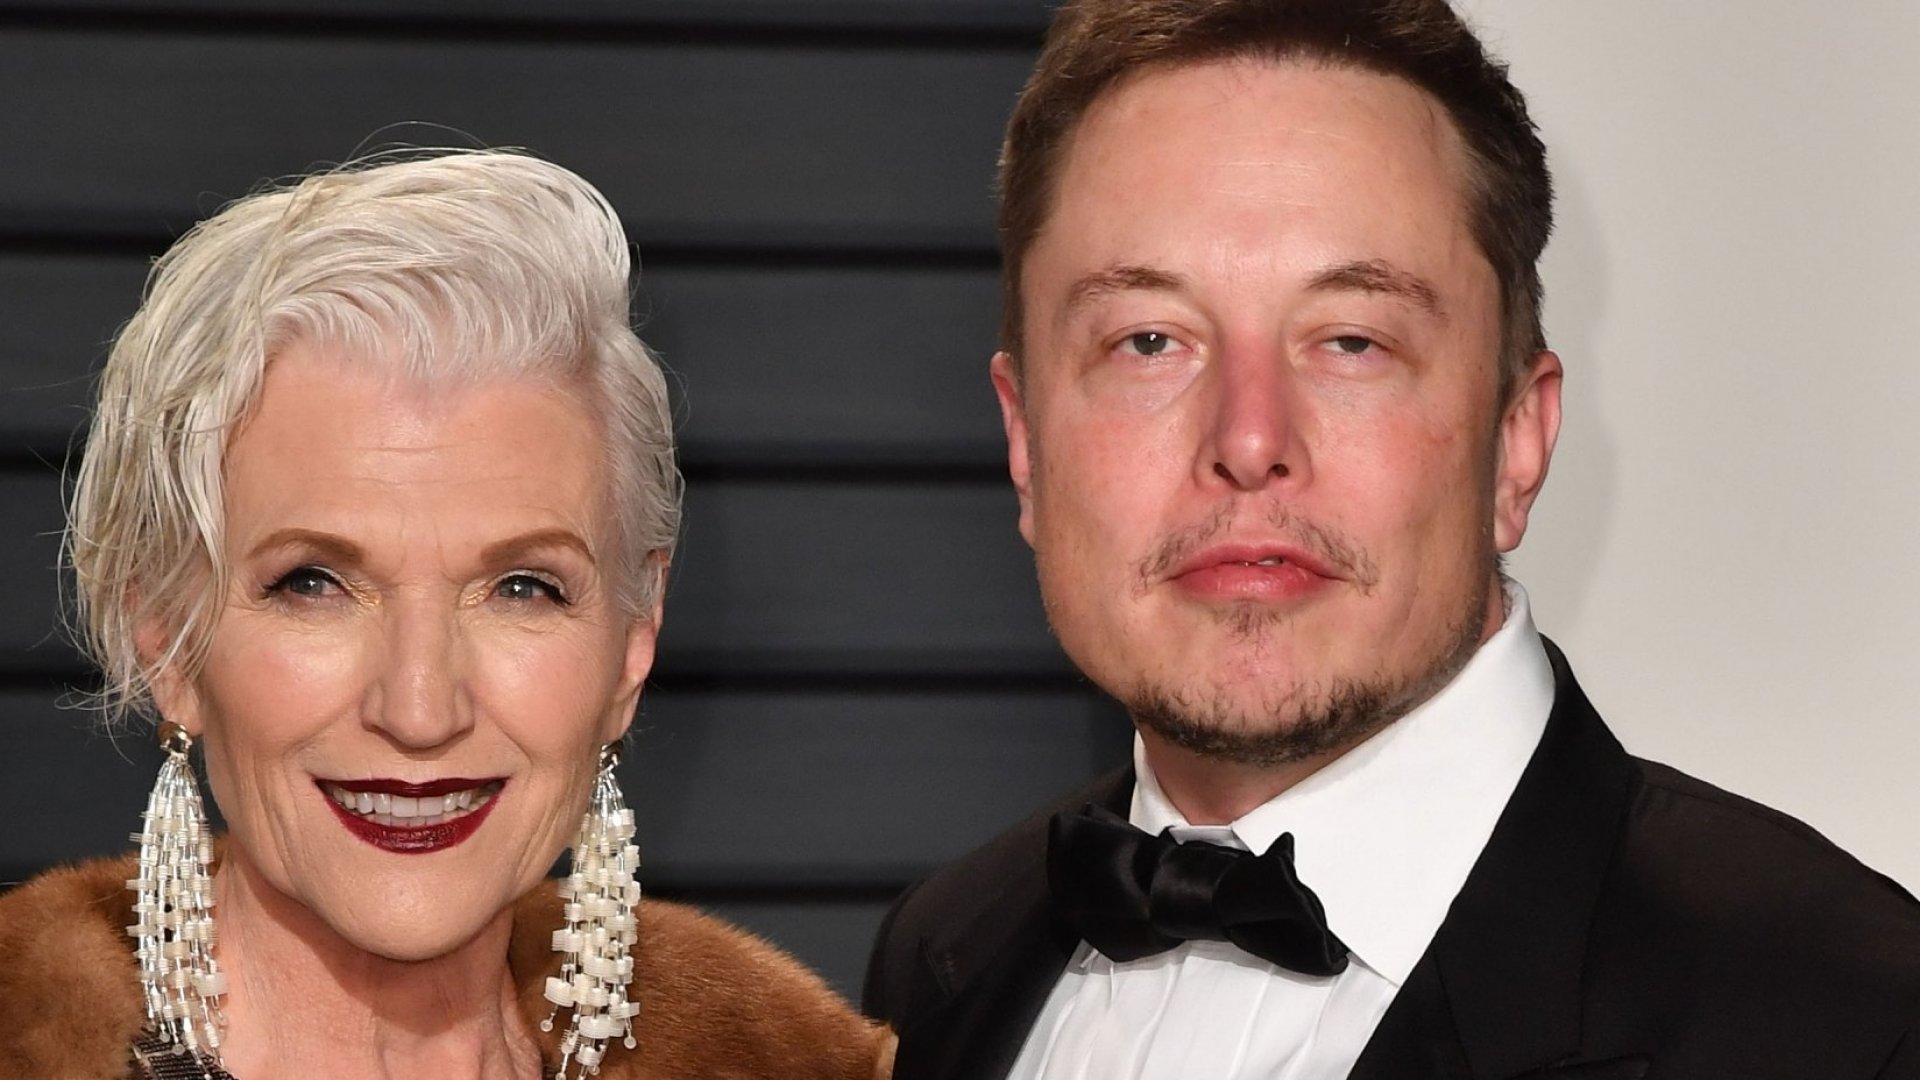 Elon Musk with his mother, Maye Musk